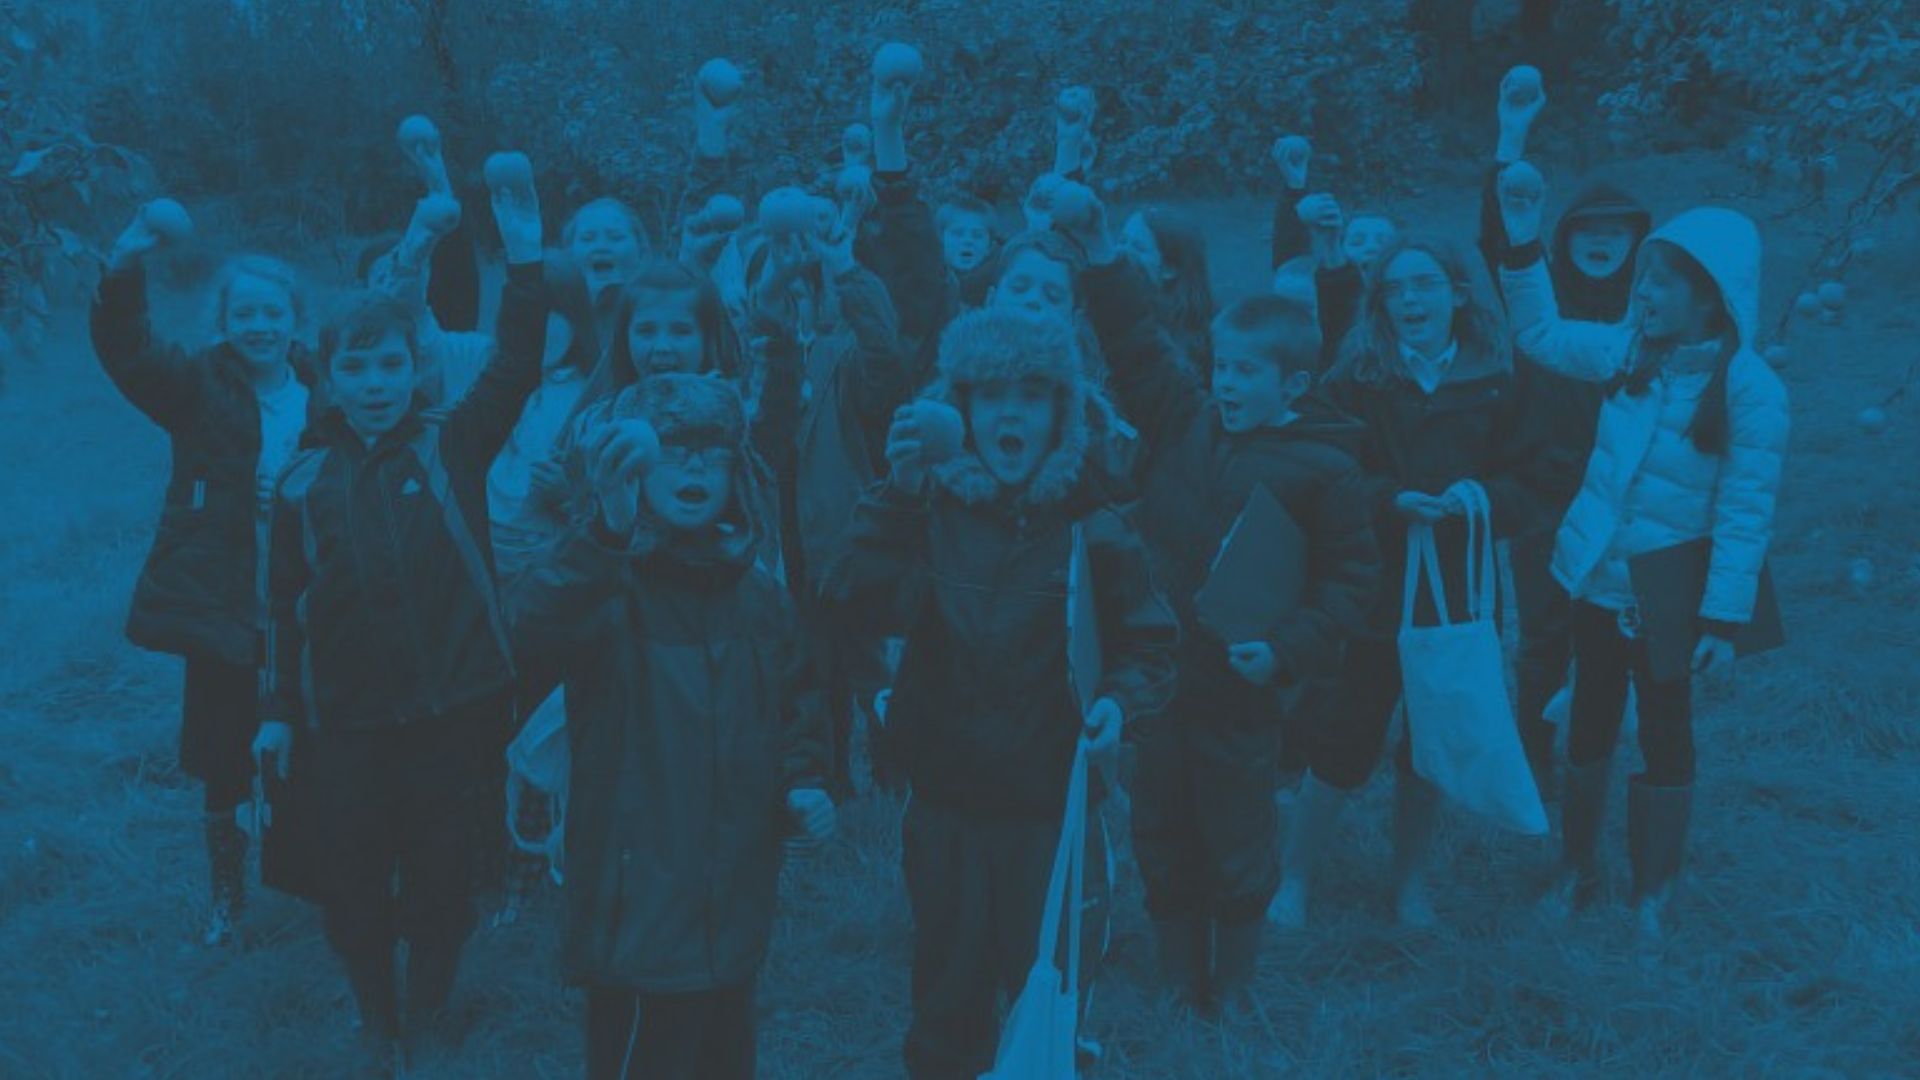 Image of excited children holding apples, from the Tree Council website - Providing funding for planting and care of trees